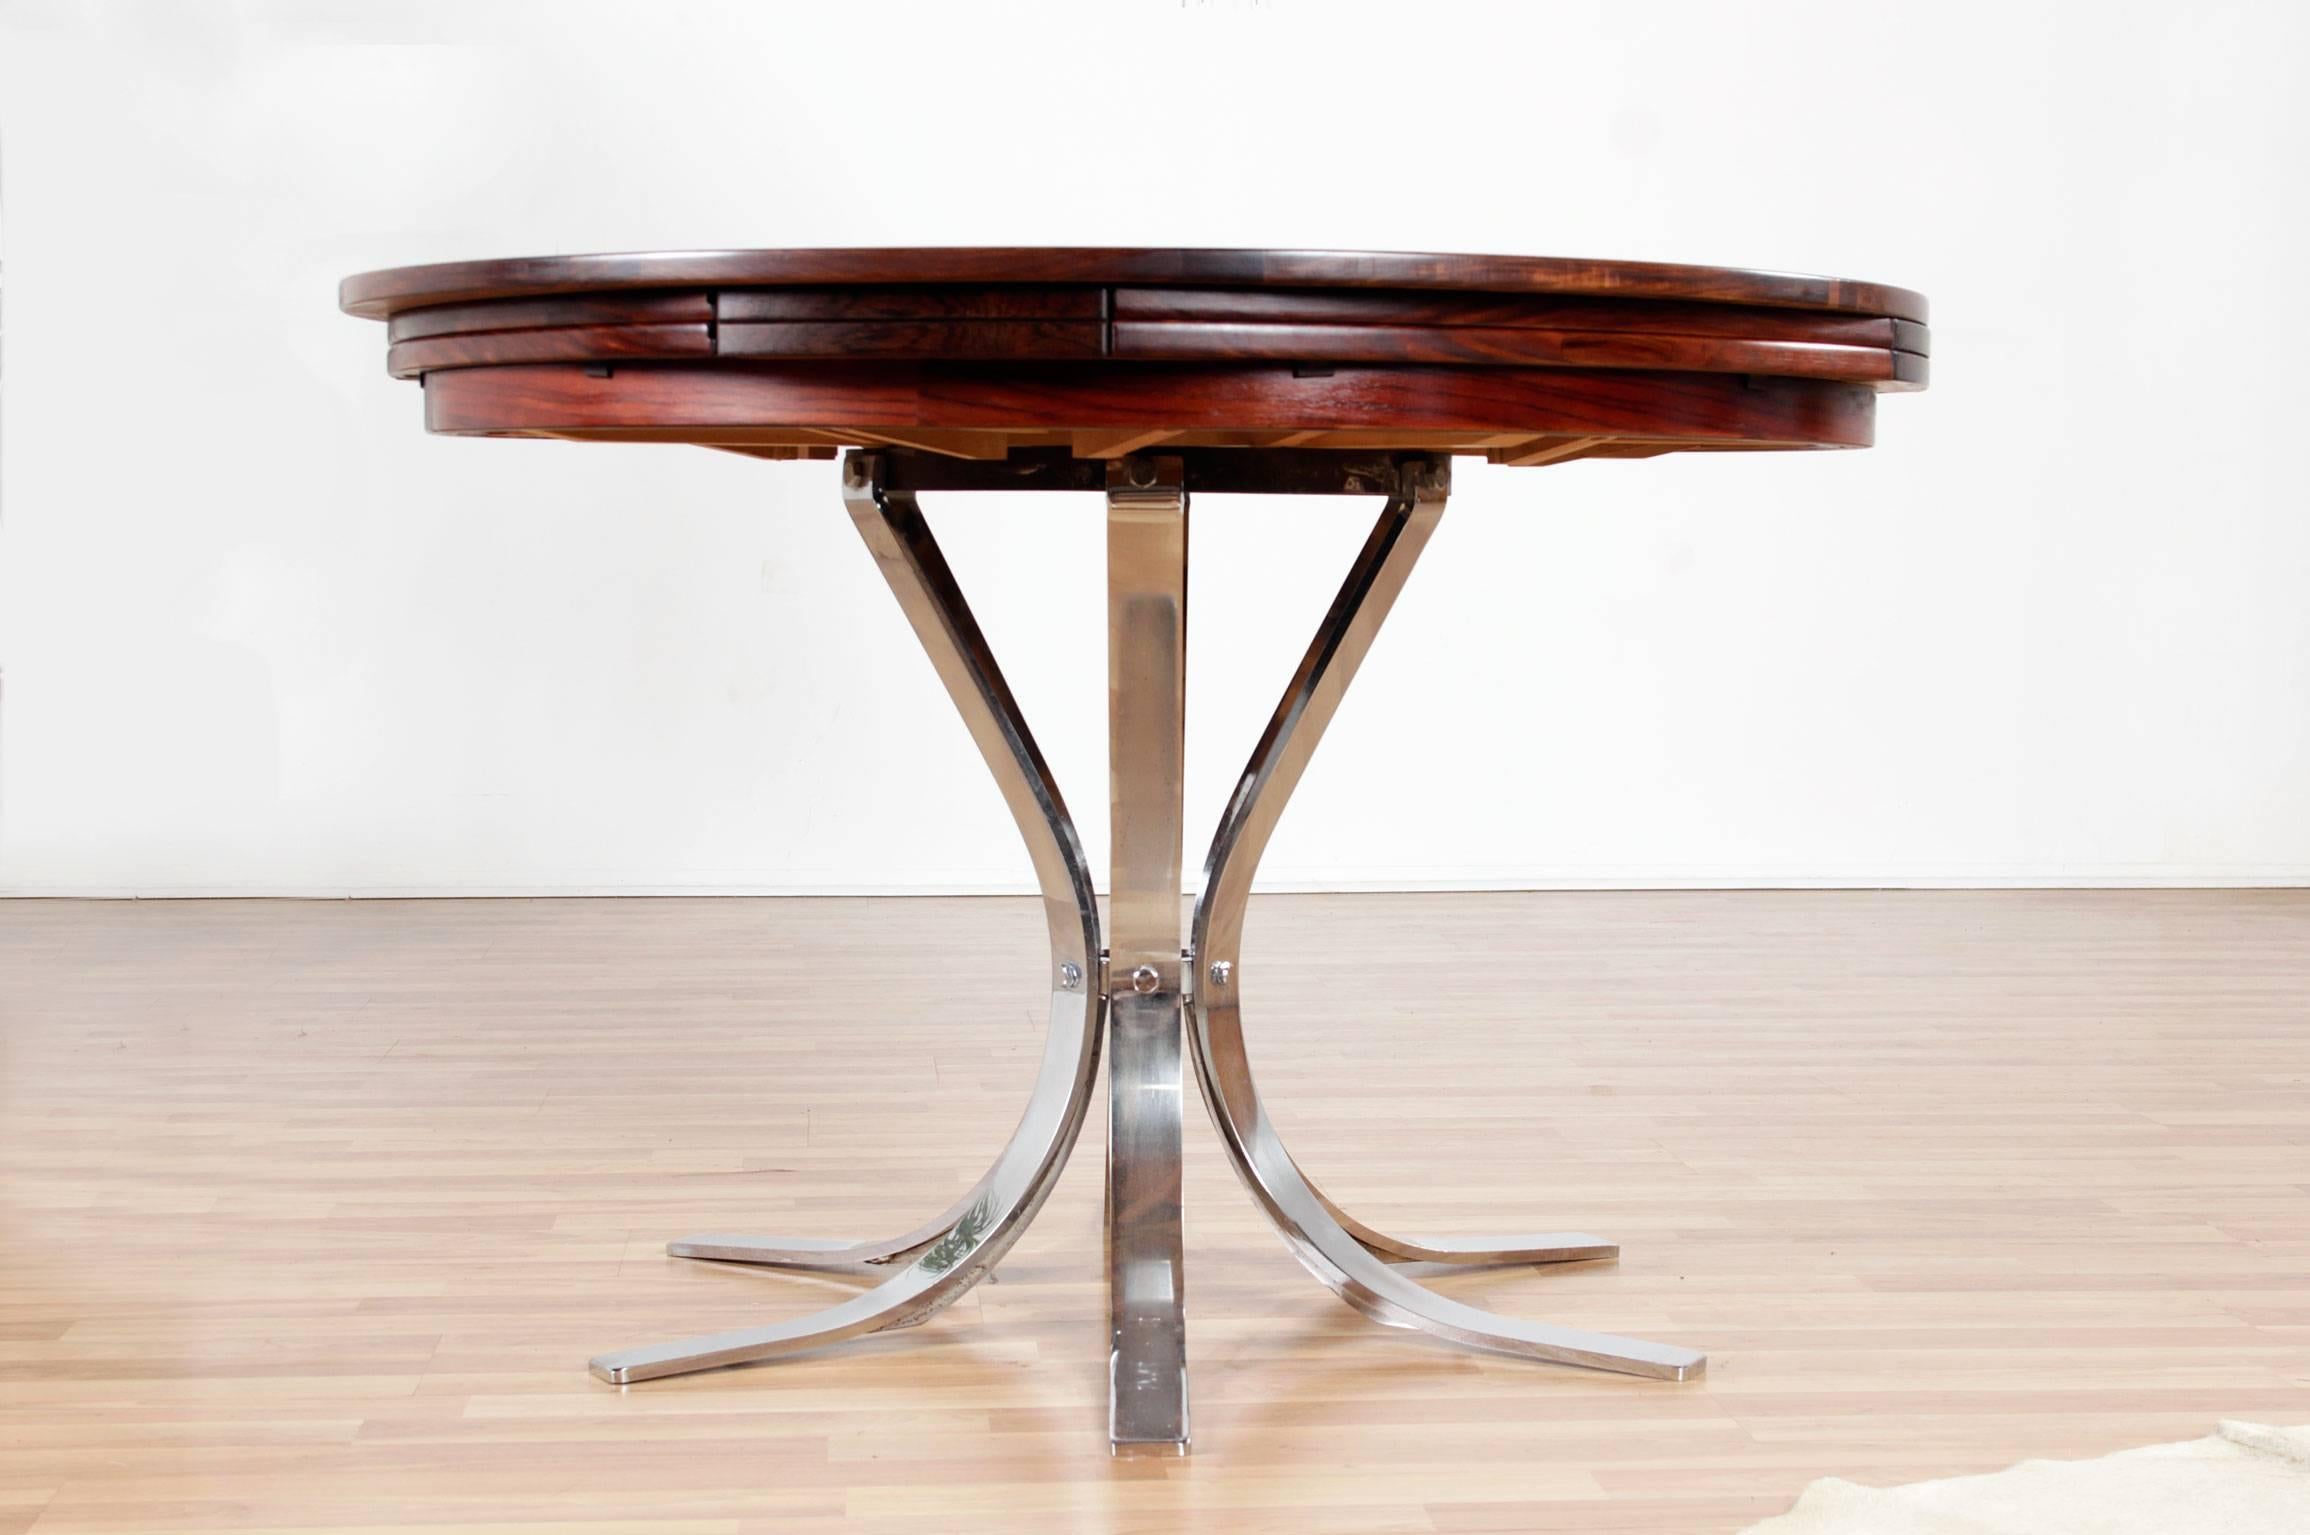 Stunning heirloom quality mid-century modern "Flip Flap Table" by Dyrlund. Made in Denmark with luxurious rosewood table top and sleek chromed steel pedestal base. The table bears the original maker's mark beneath the table top. What makes